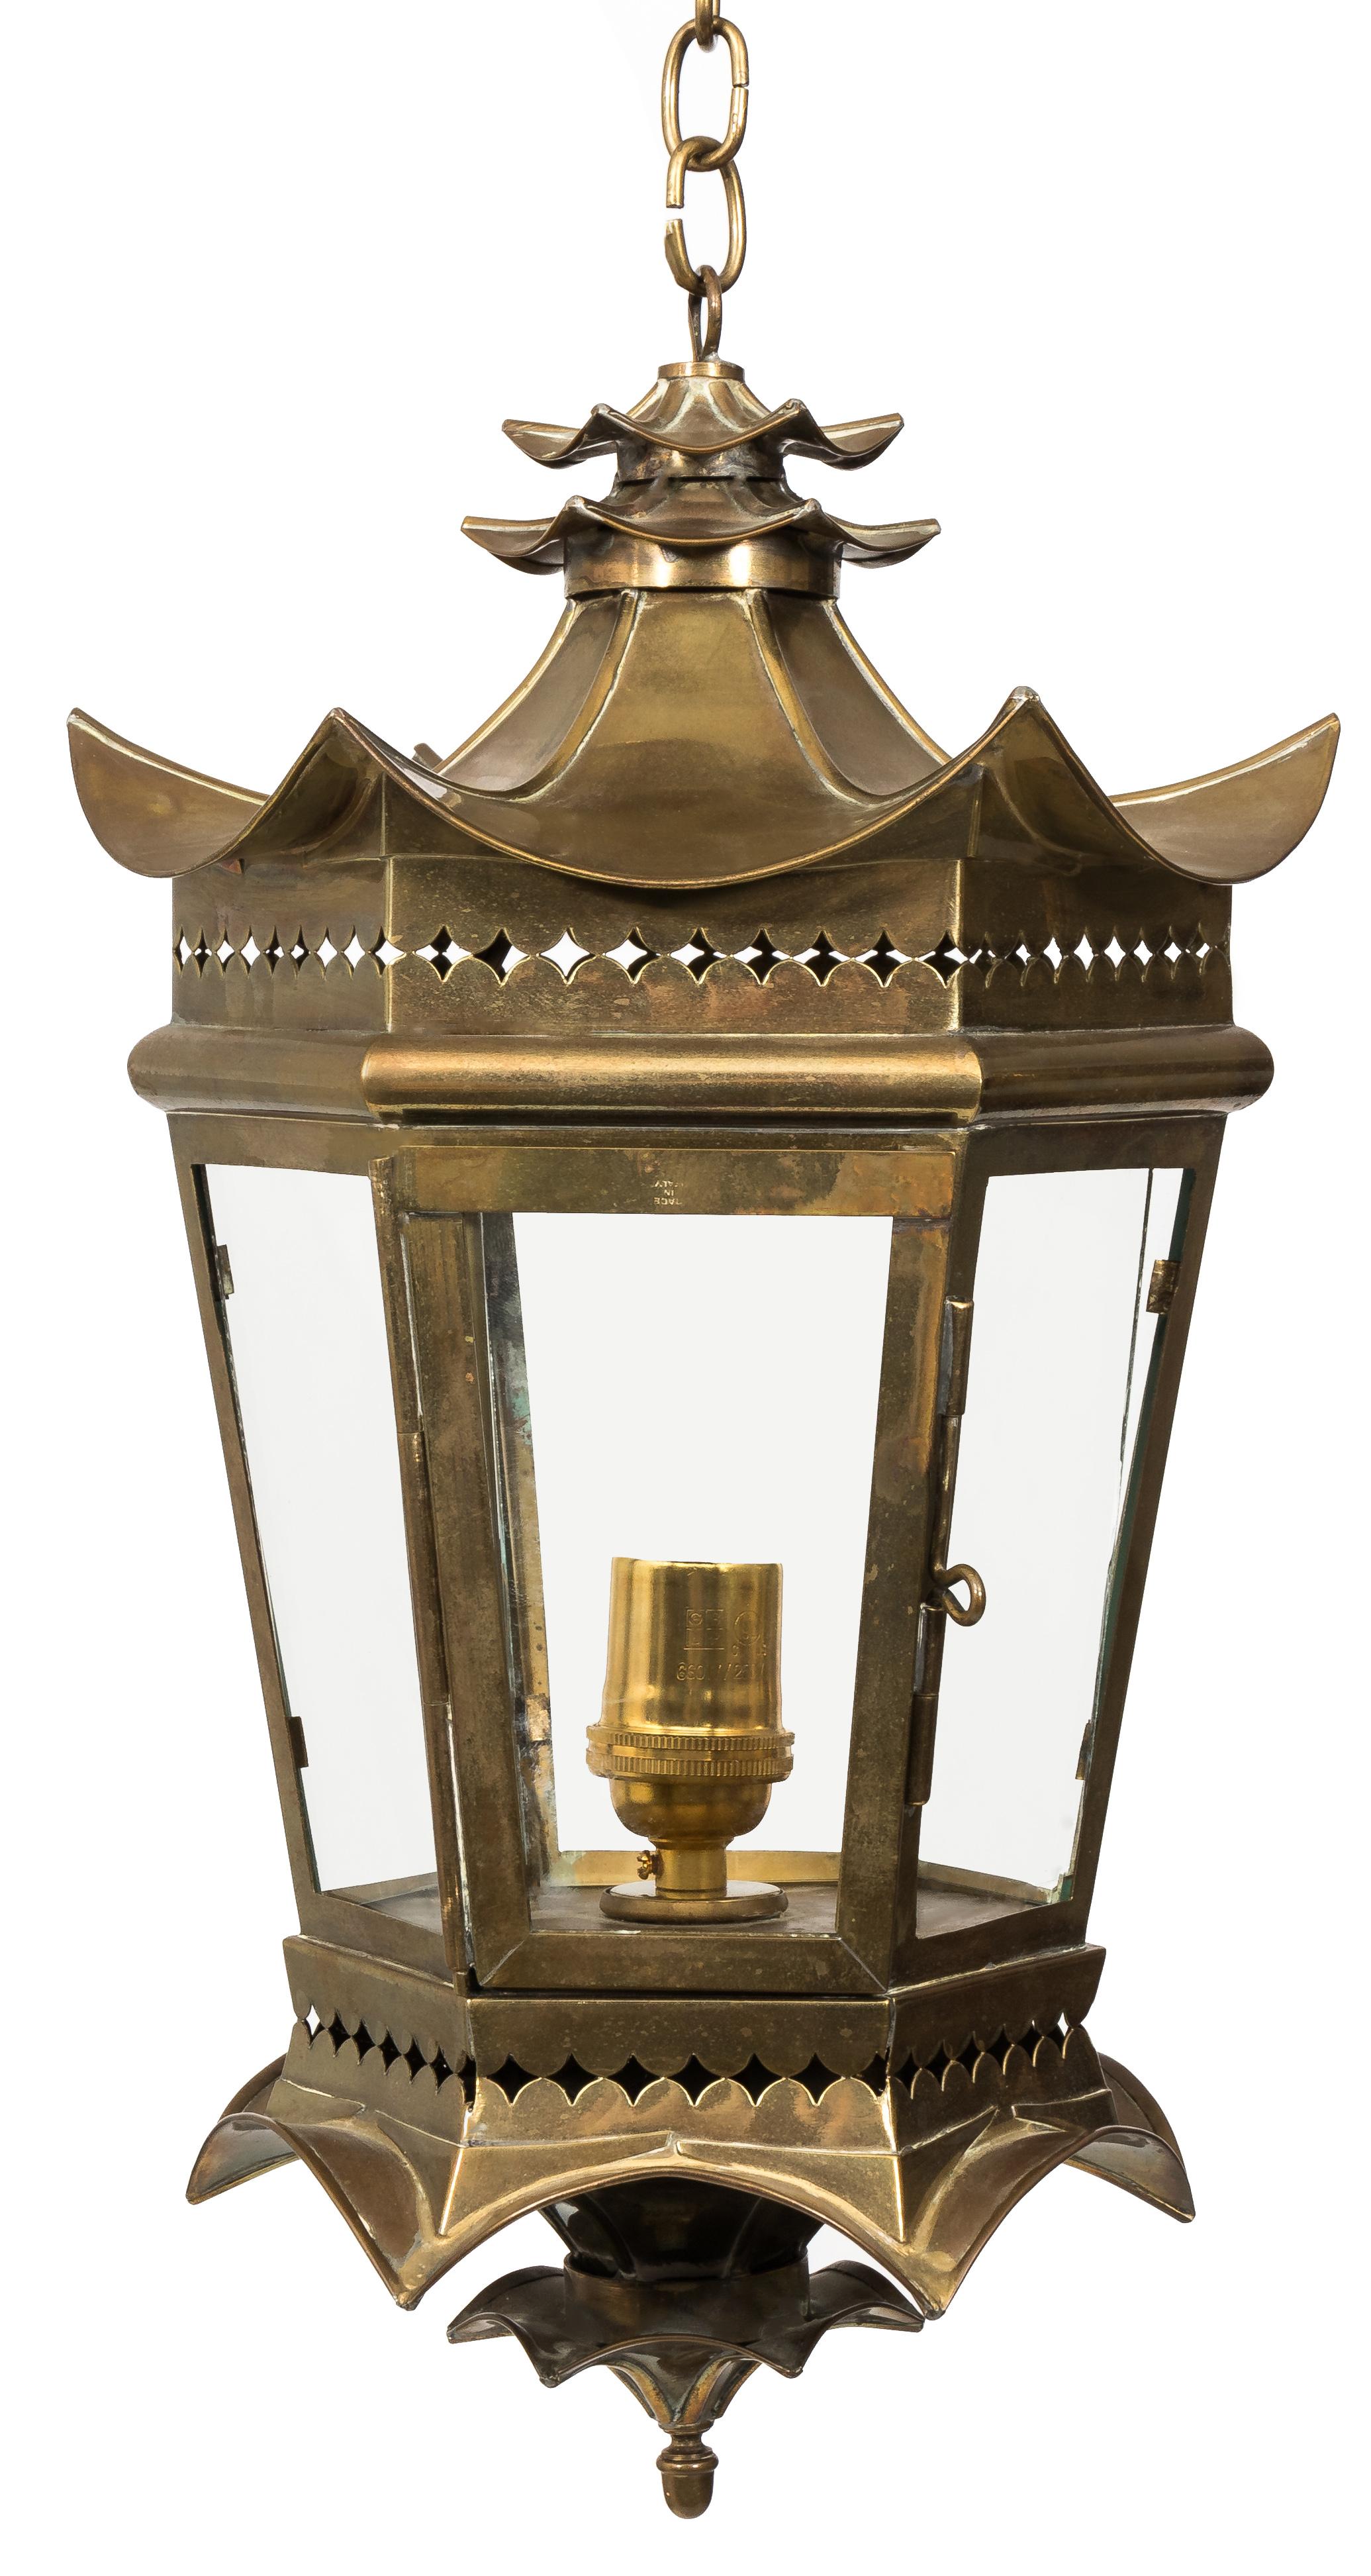 1960s Italian brass pagoda pendant light. Clear glass panels. Takes one standard bulb. Newly rewired with 36” L chain and canopy included. Stamped made in Italy.